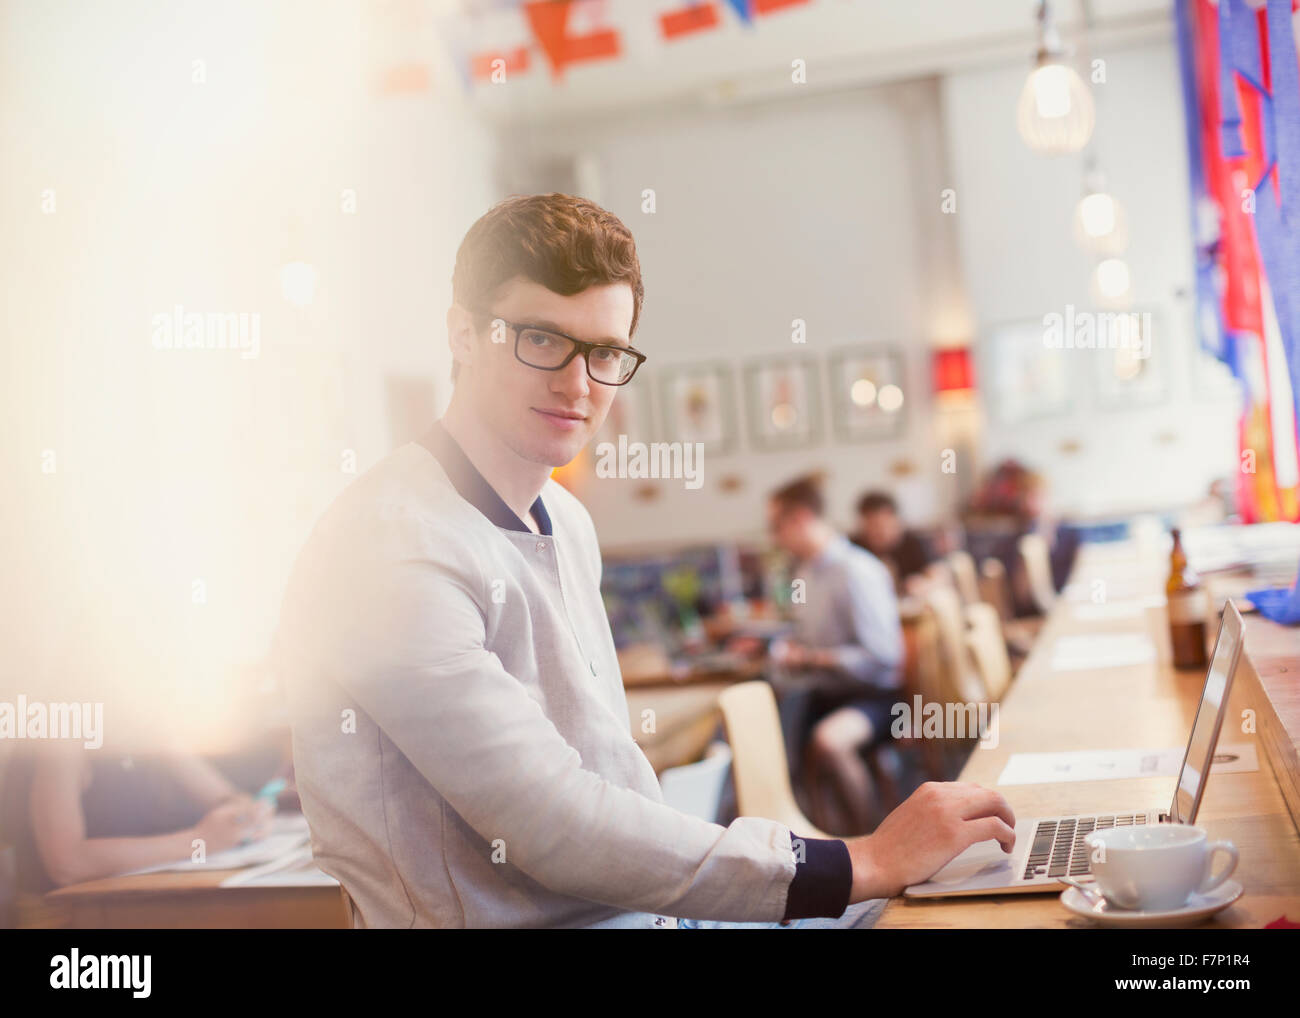 Portrait man using laptop in cafe Stock Photo